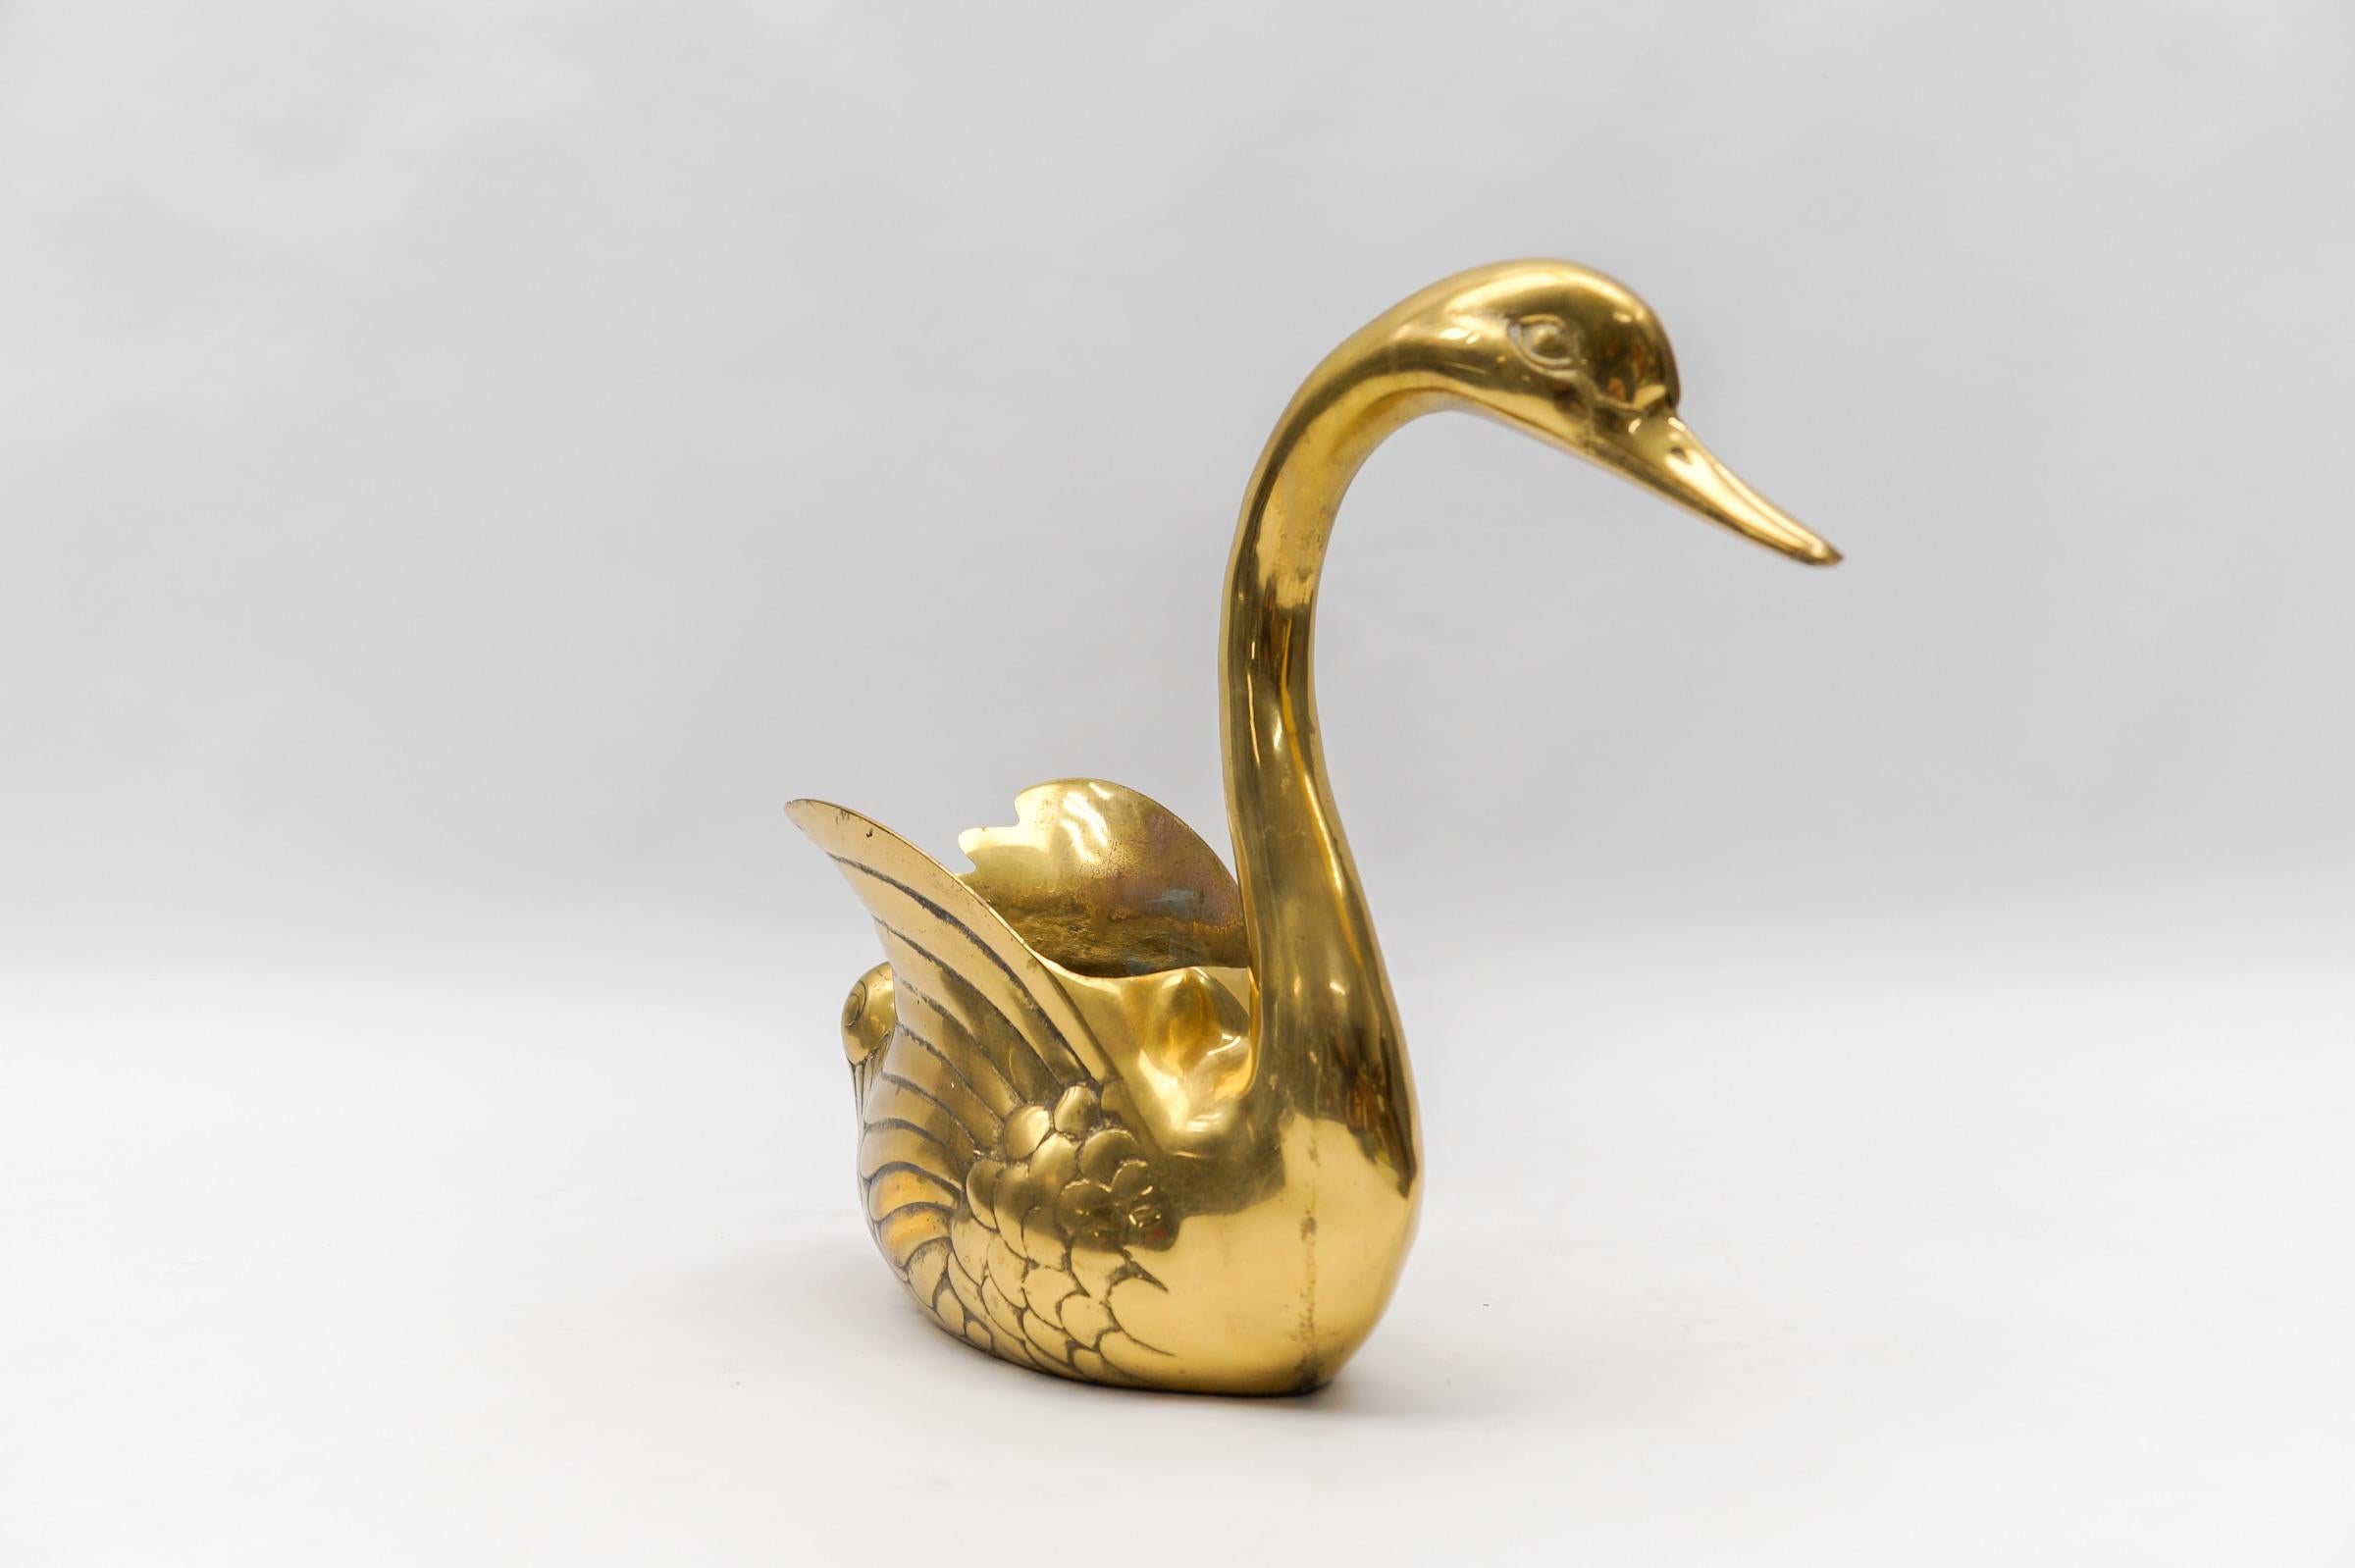 Leather magnificent decorative swan / planter made of solid brass, 1960s Italy For Sale